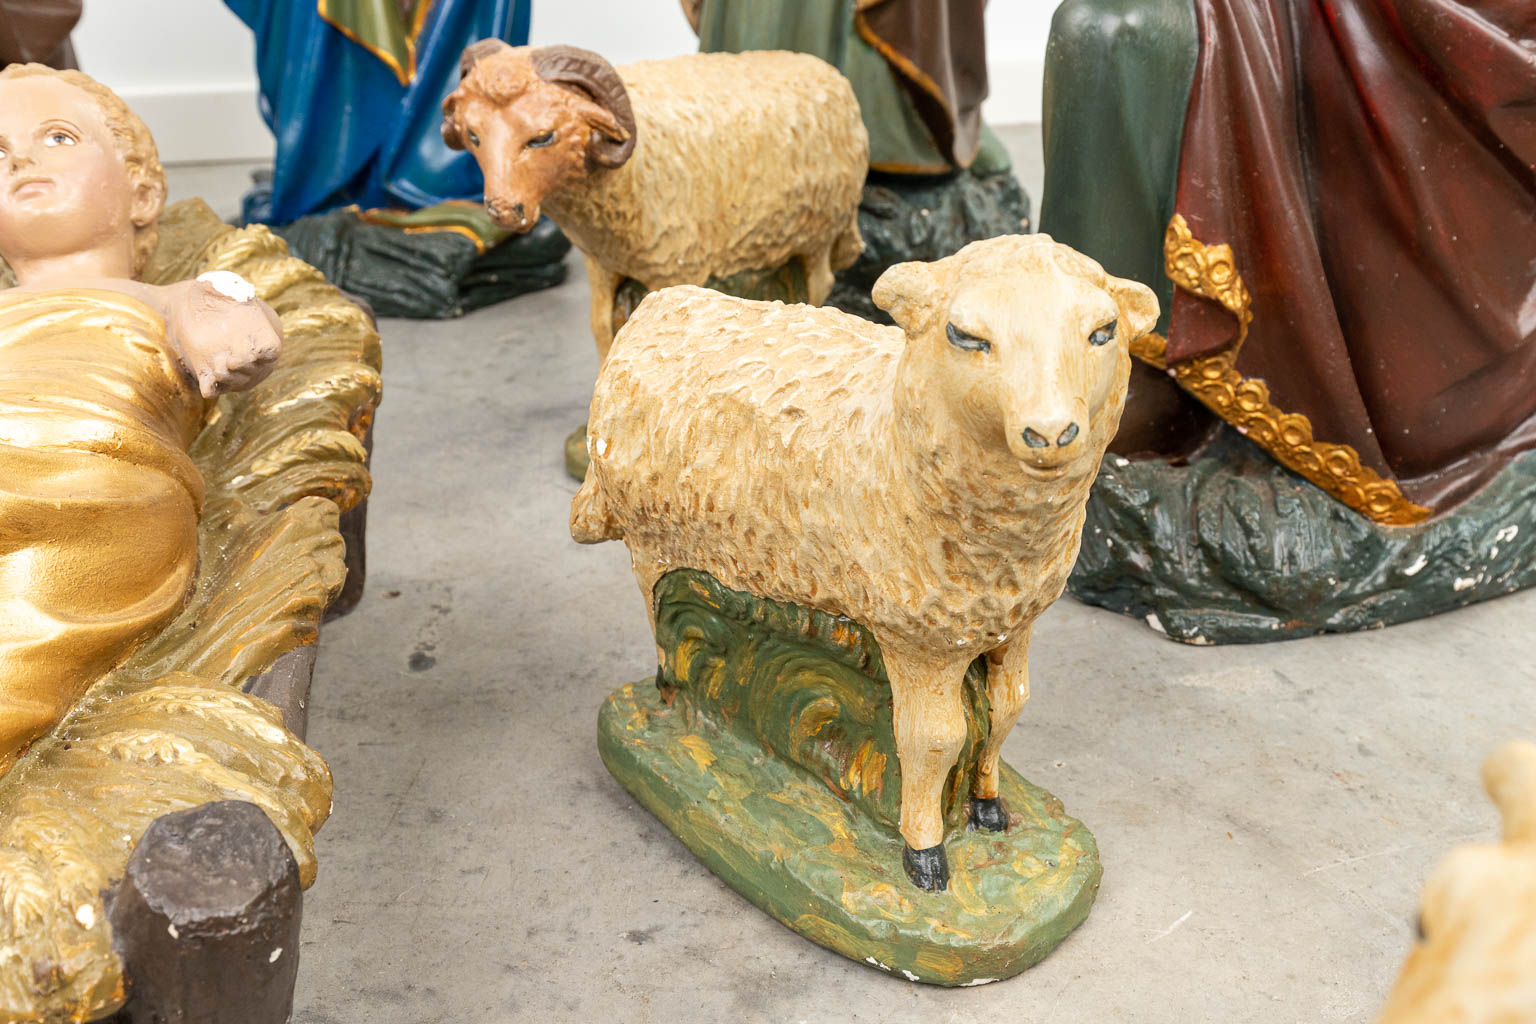 A complete and large figurative Nativity scene made of patinated plaster